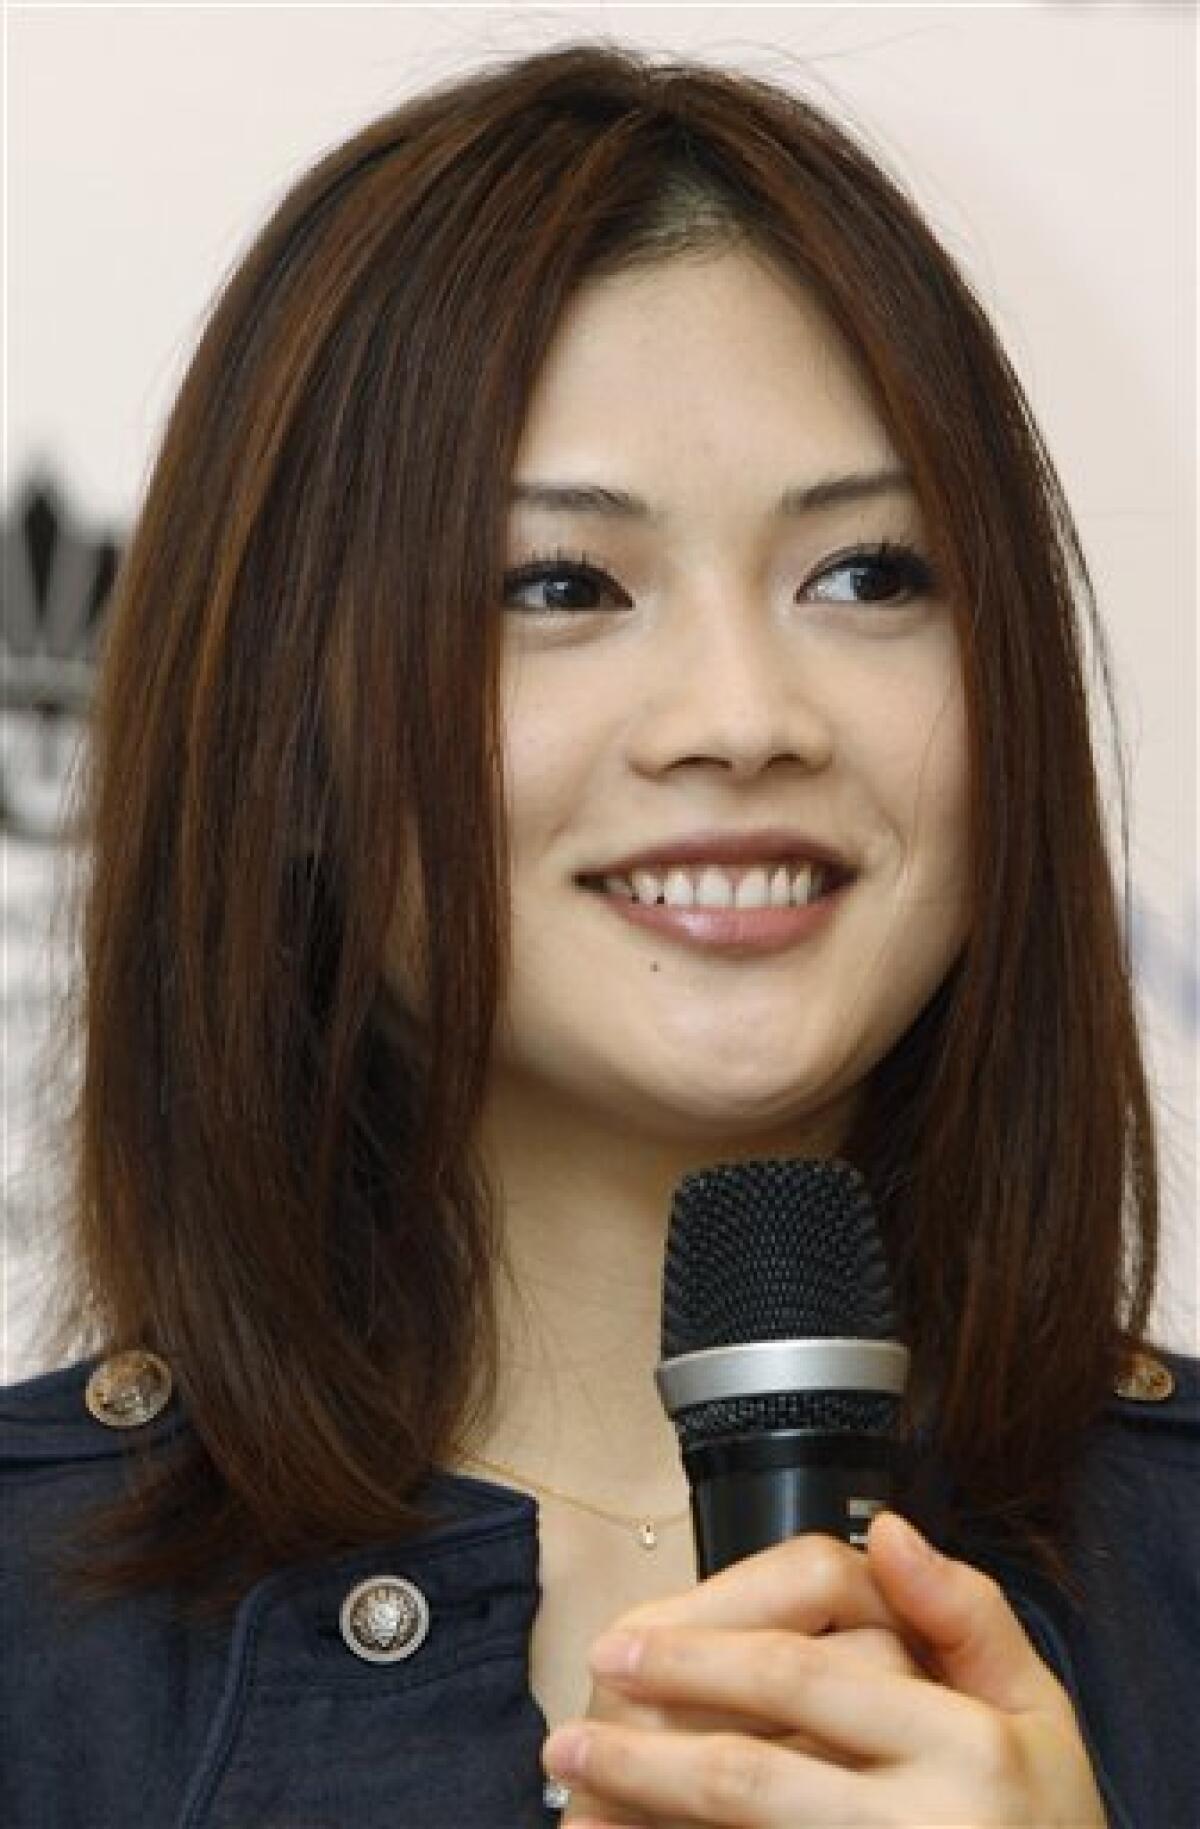 FILE - In this May 15, 2011 file photo, Japanese singer songwriter Yui speaks during a news conference in Hong Kong. The 24-year-old pop star played to a packed house at the 14,000-seat AsiaWorld-Expo Arena on Hong Kong's outlying Lantau Island late Sunday, June 26, 2011. (AP Photo/Kin Cheung, File)